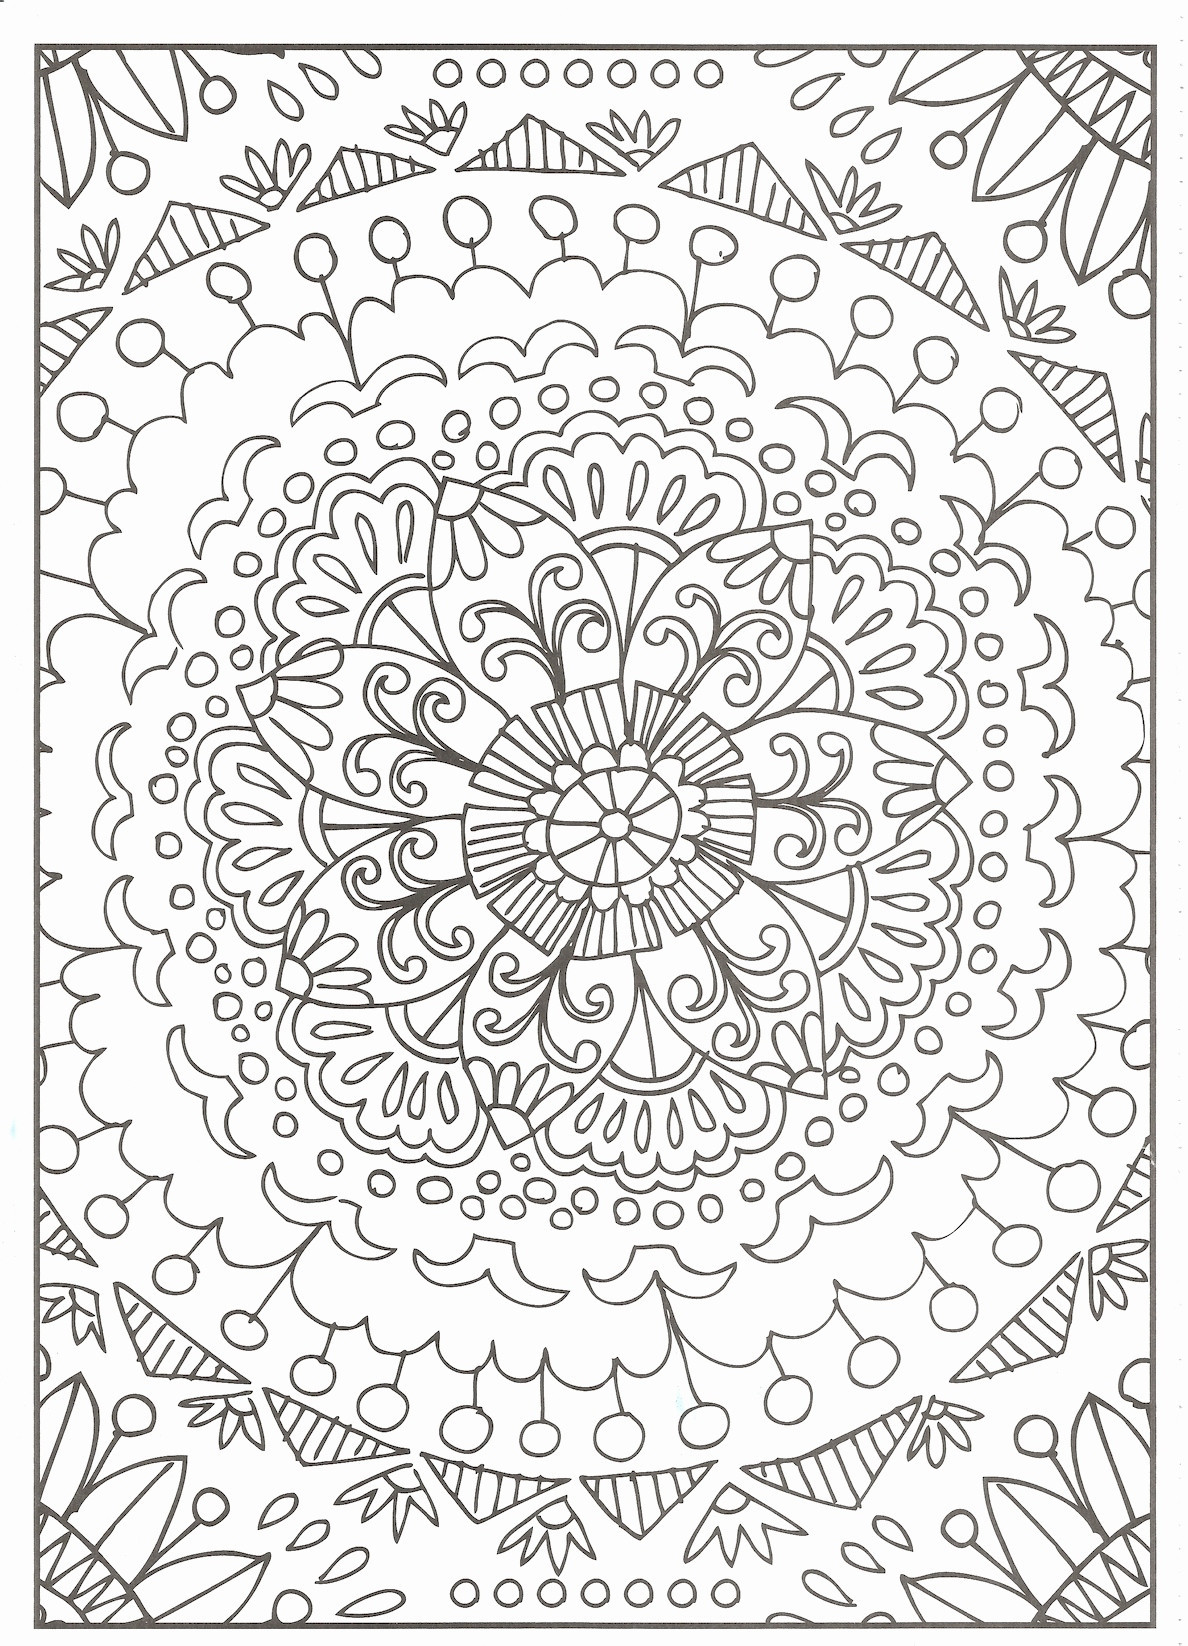 29 Famous Black and White Flower Vase 2024 free download black and white flower vase of free printable flower coloring pages for adults inspirational cool intended for cool vases flower vase coloring page pages flowers in a top i 0d